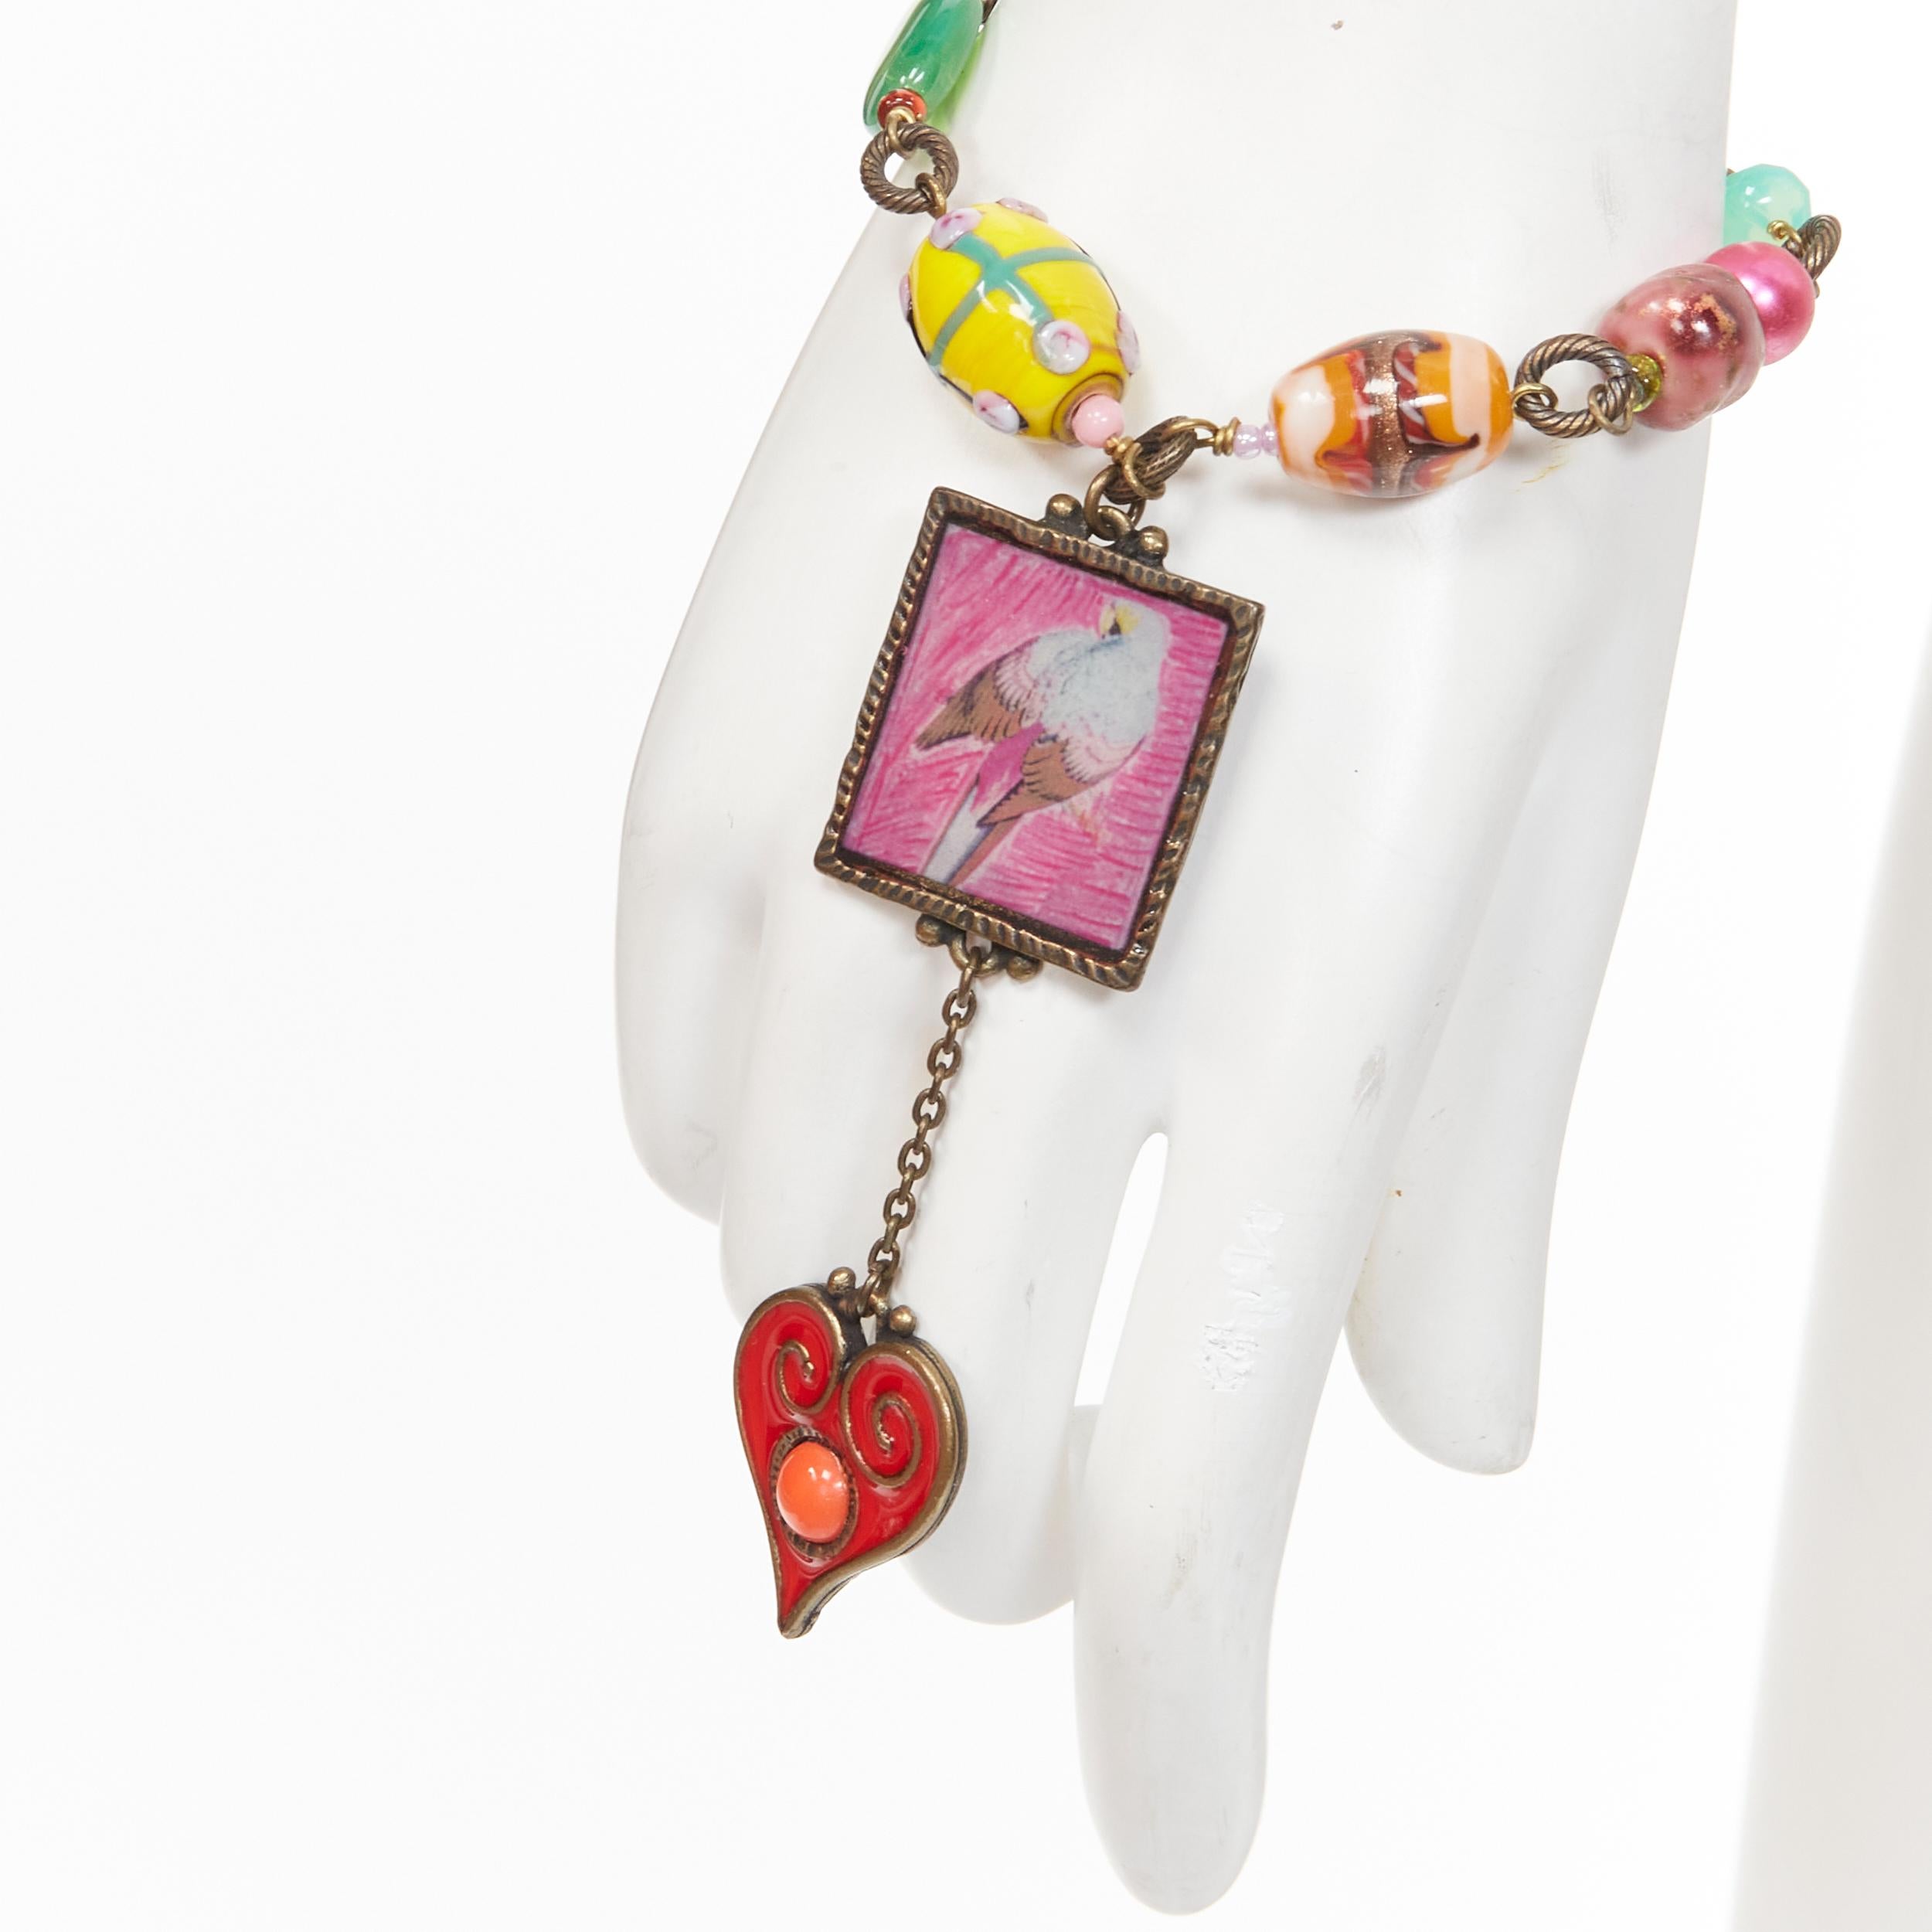 PHILIPE FERRANDIS colorful charms bird resin frame chain bracelet
Reference: ANWU/A00303
Brand: Philipe Ferrandis
Material: Metal, Acrylic
Color: Multicolour, Bronze
Pattern: Animal Print
Closure: Lobster Clasp
Extra Details: Bird resin frame charm